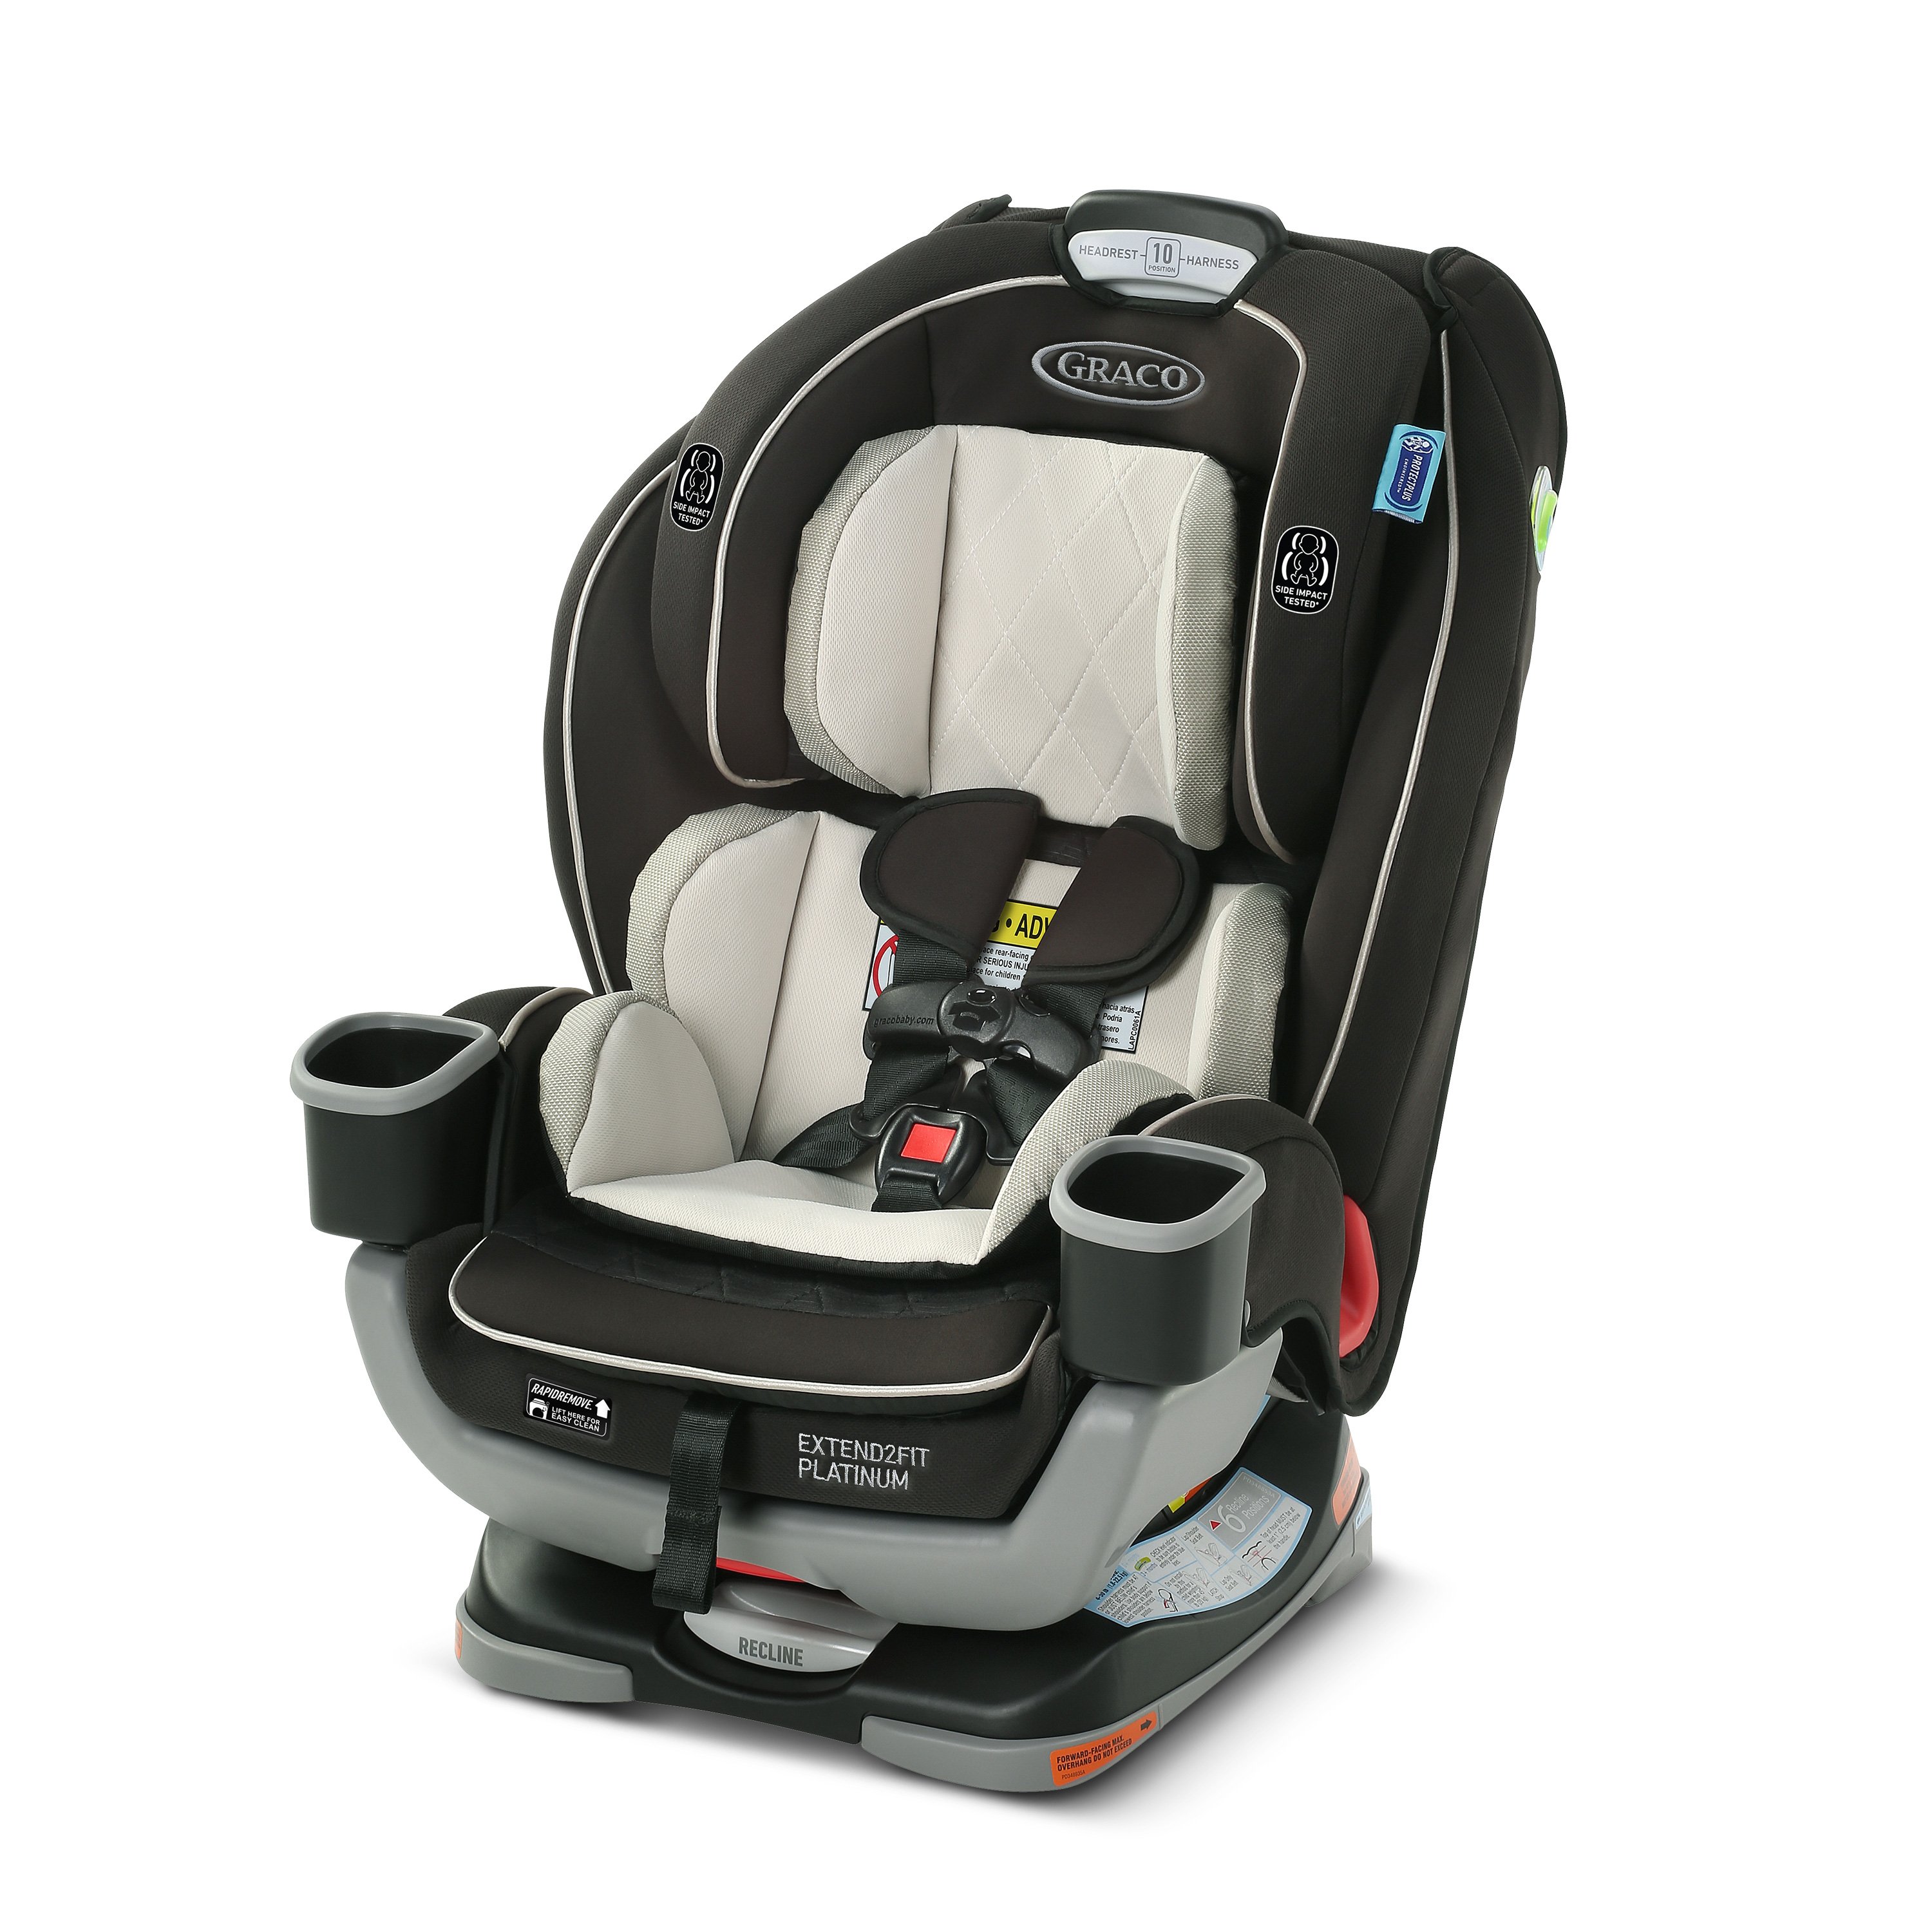 graco extend to fit platinum